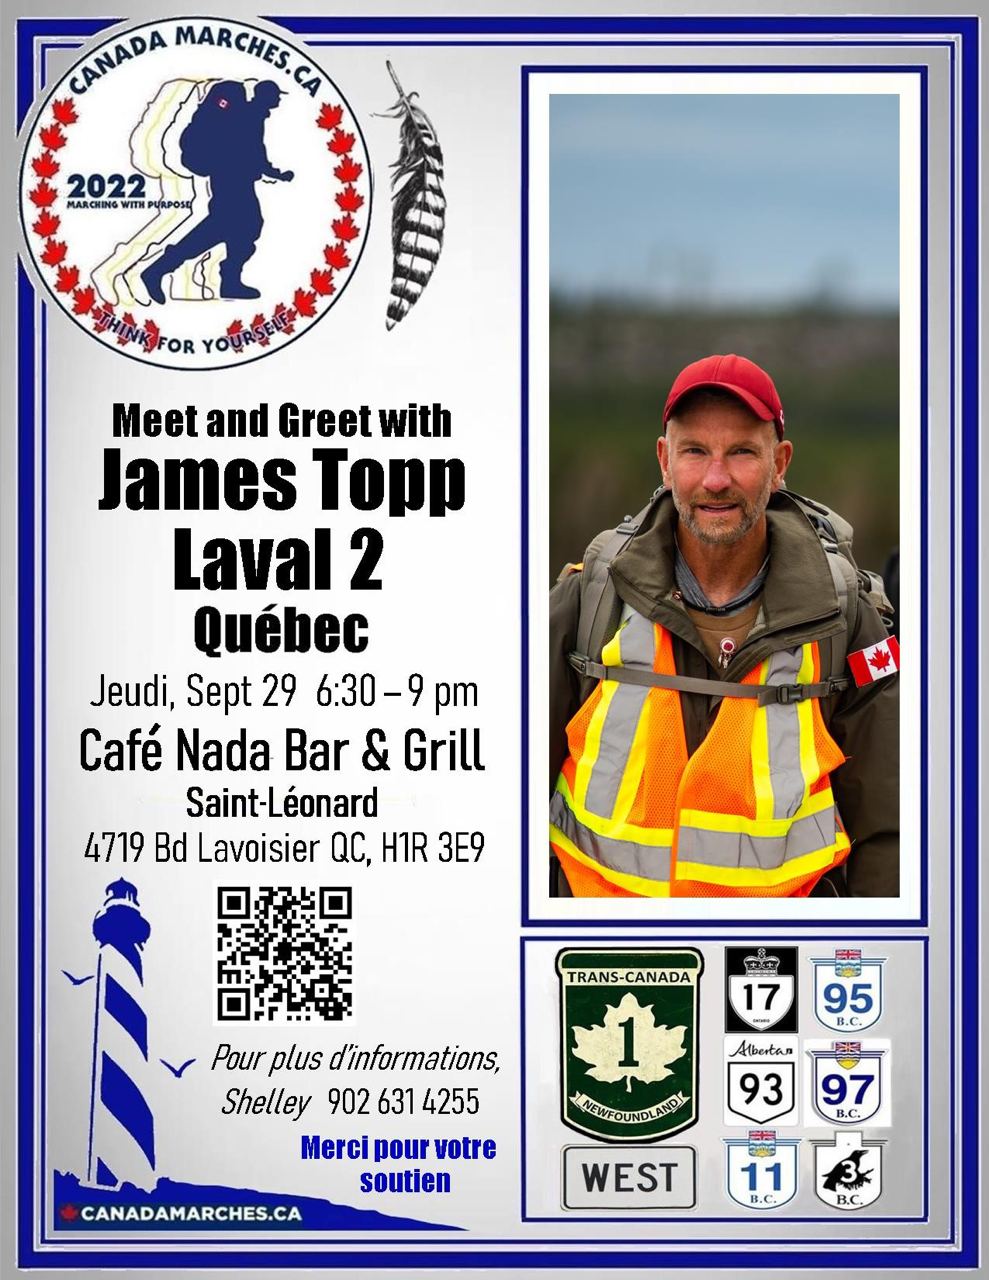 Meet and Greet with James Topp and the Canada Marches Team